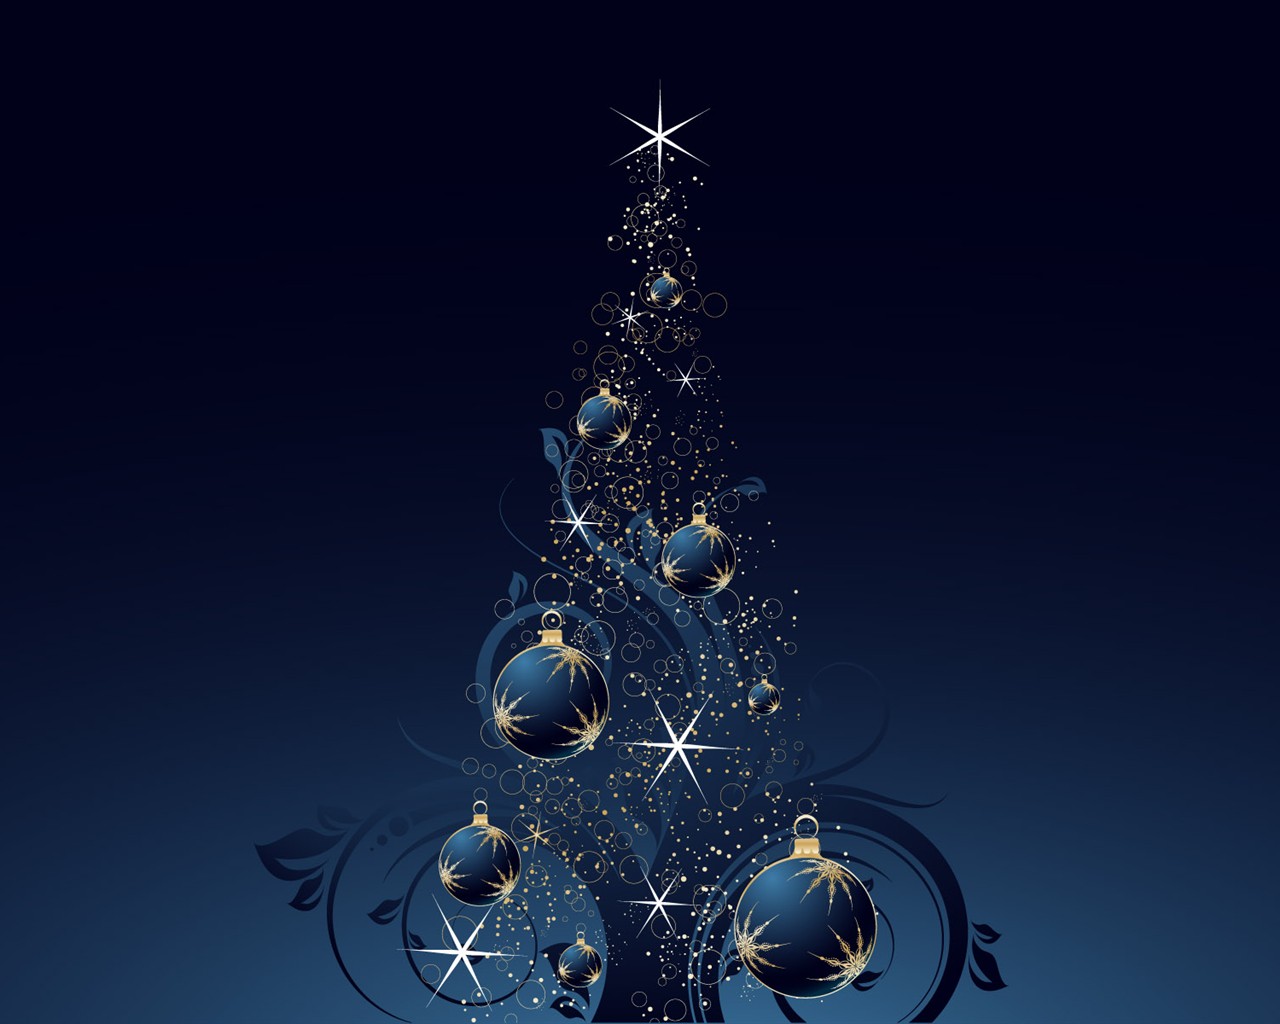 Exquisite Christmas Theme HD Wallpapers #37 - 1280x1024